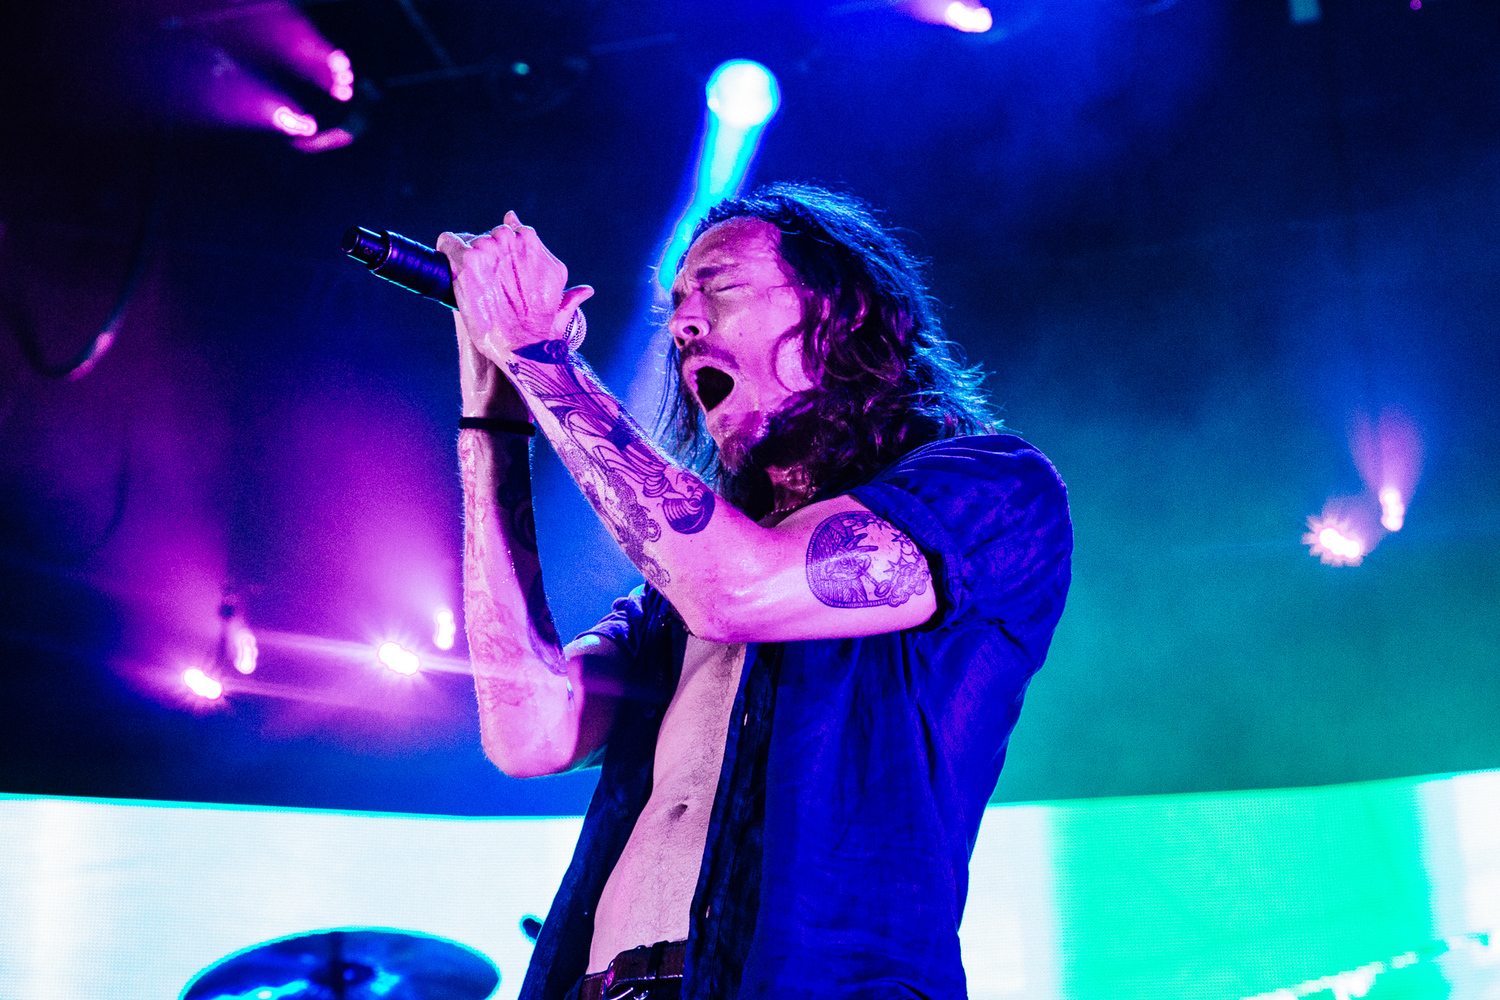 Incubus at Orpheum Theater - Omaha